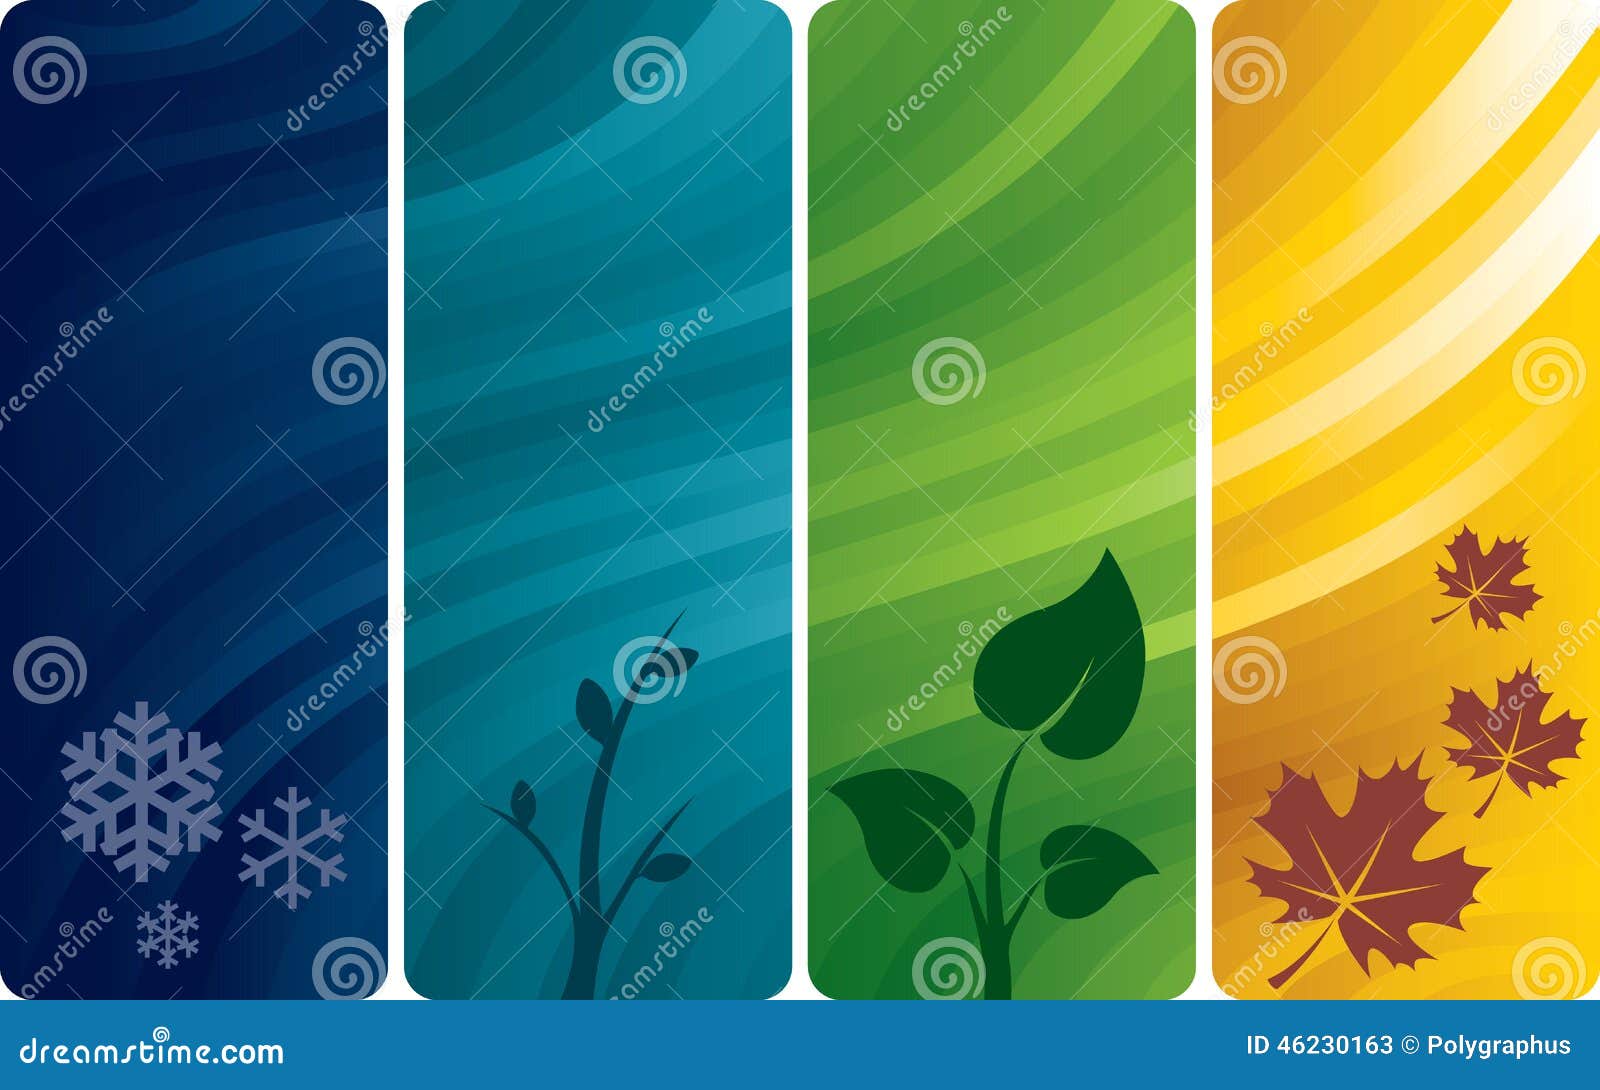 four abstract backgrounds